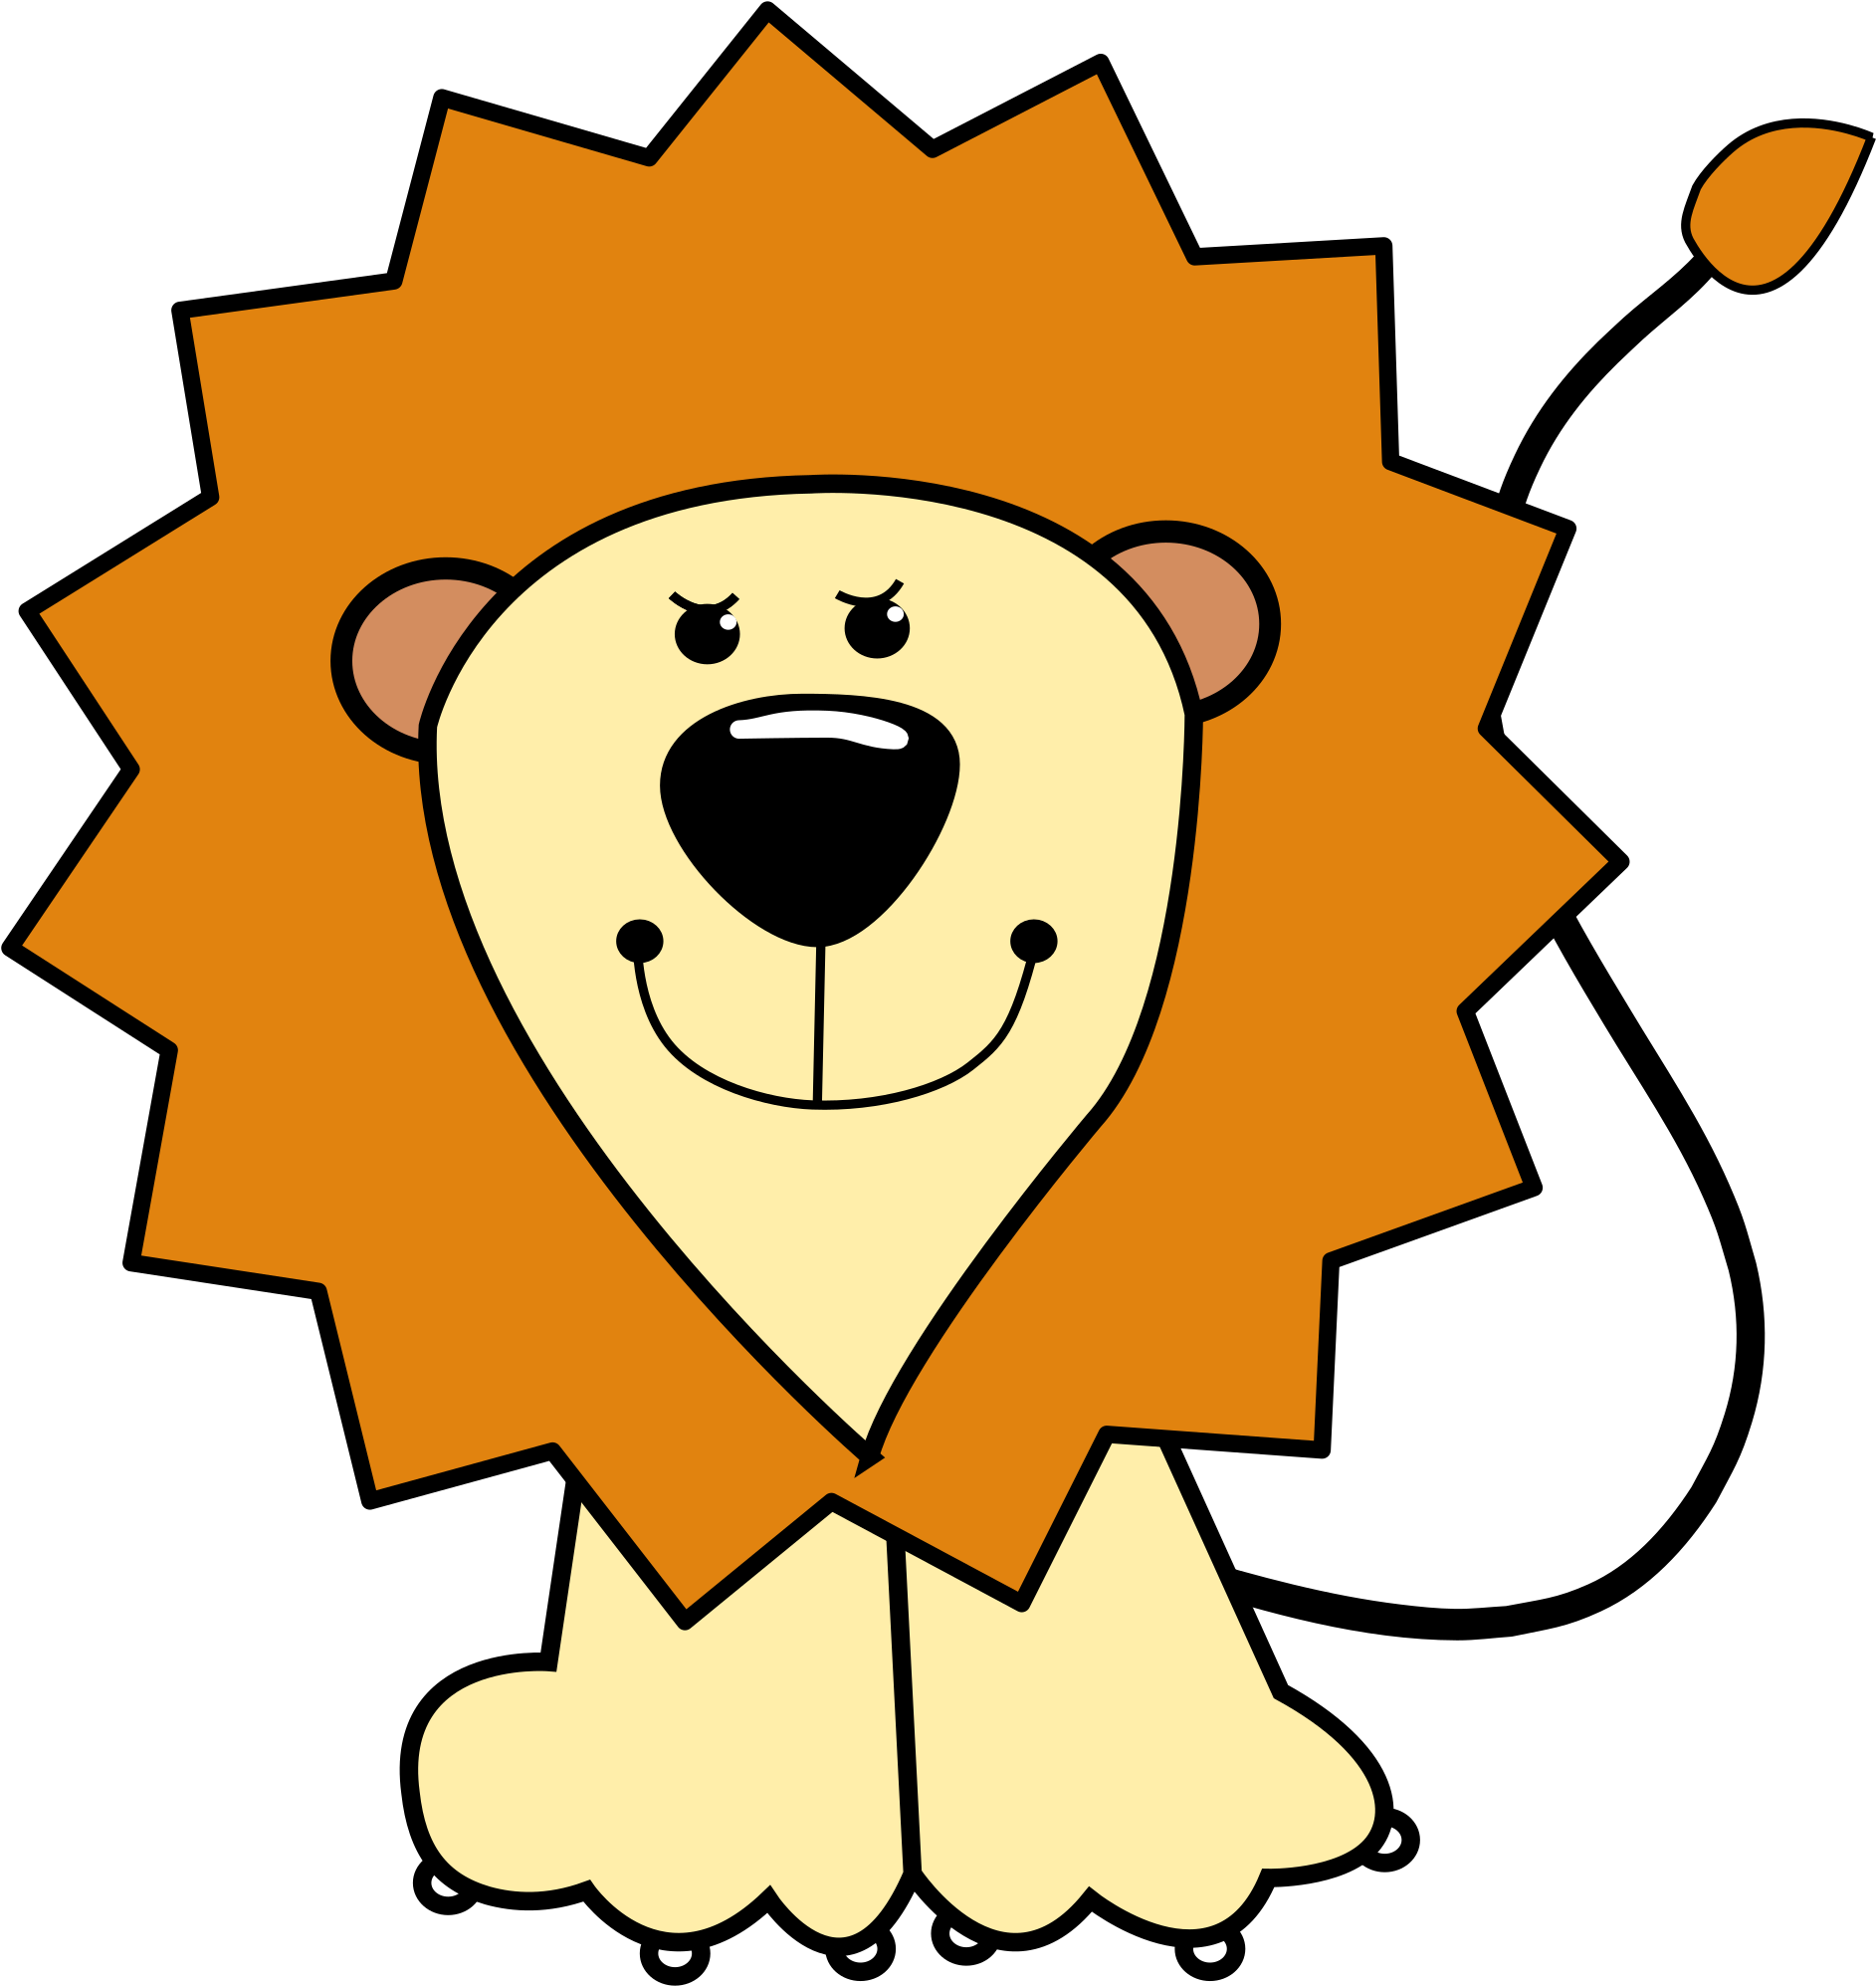 Baby Lions Cartoon Drawing Clip Art - Baby Lions Cartoon Drawing Clip Art (2269x2400)